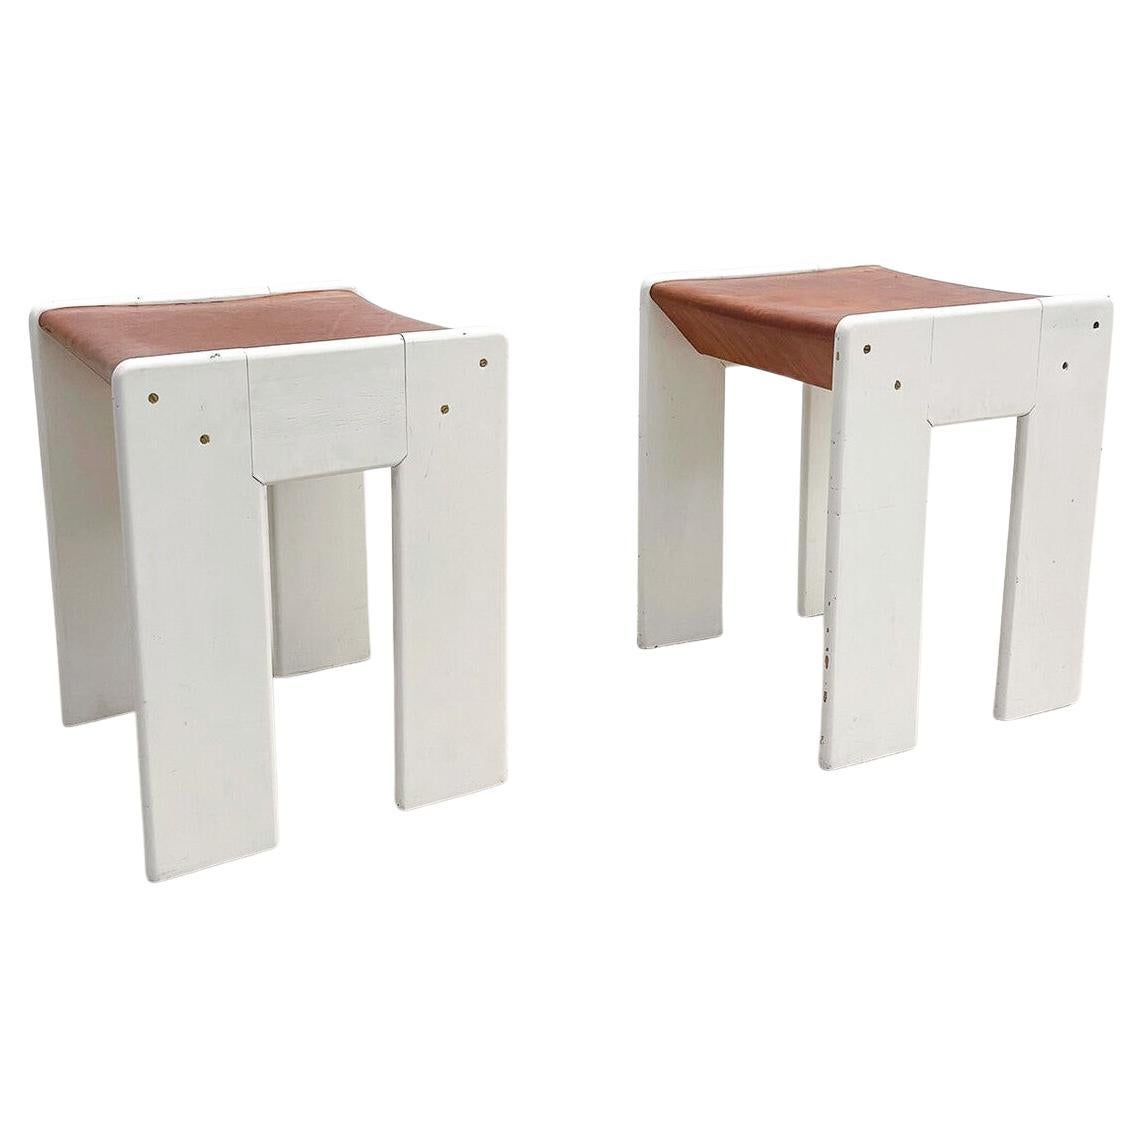 Mid-Century Modern Pair of Stools, White wood and Cognac Leather, Italy, 1960s